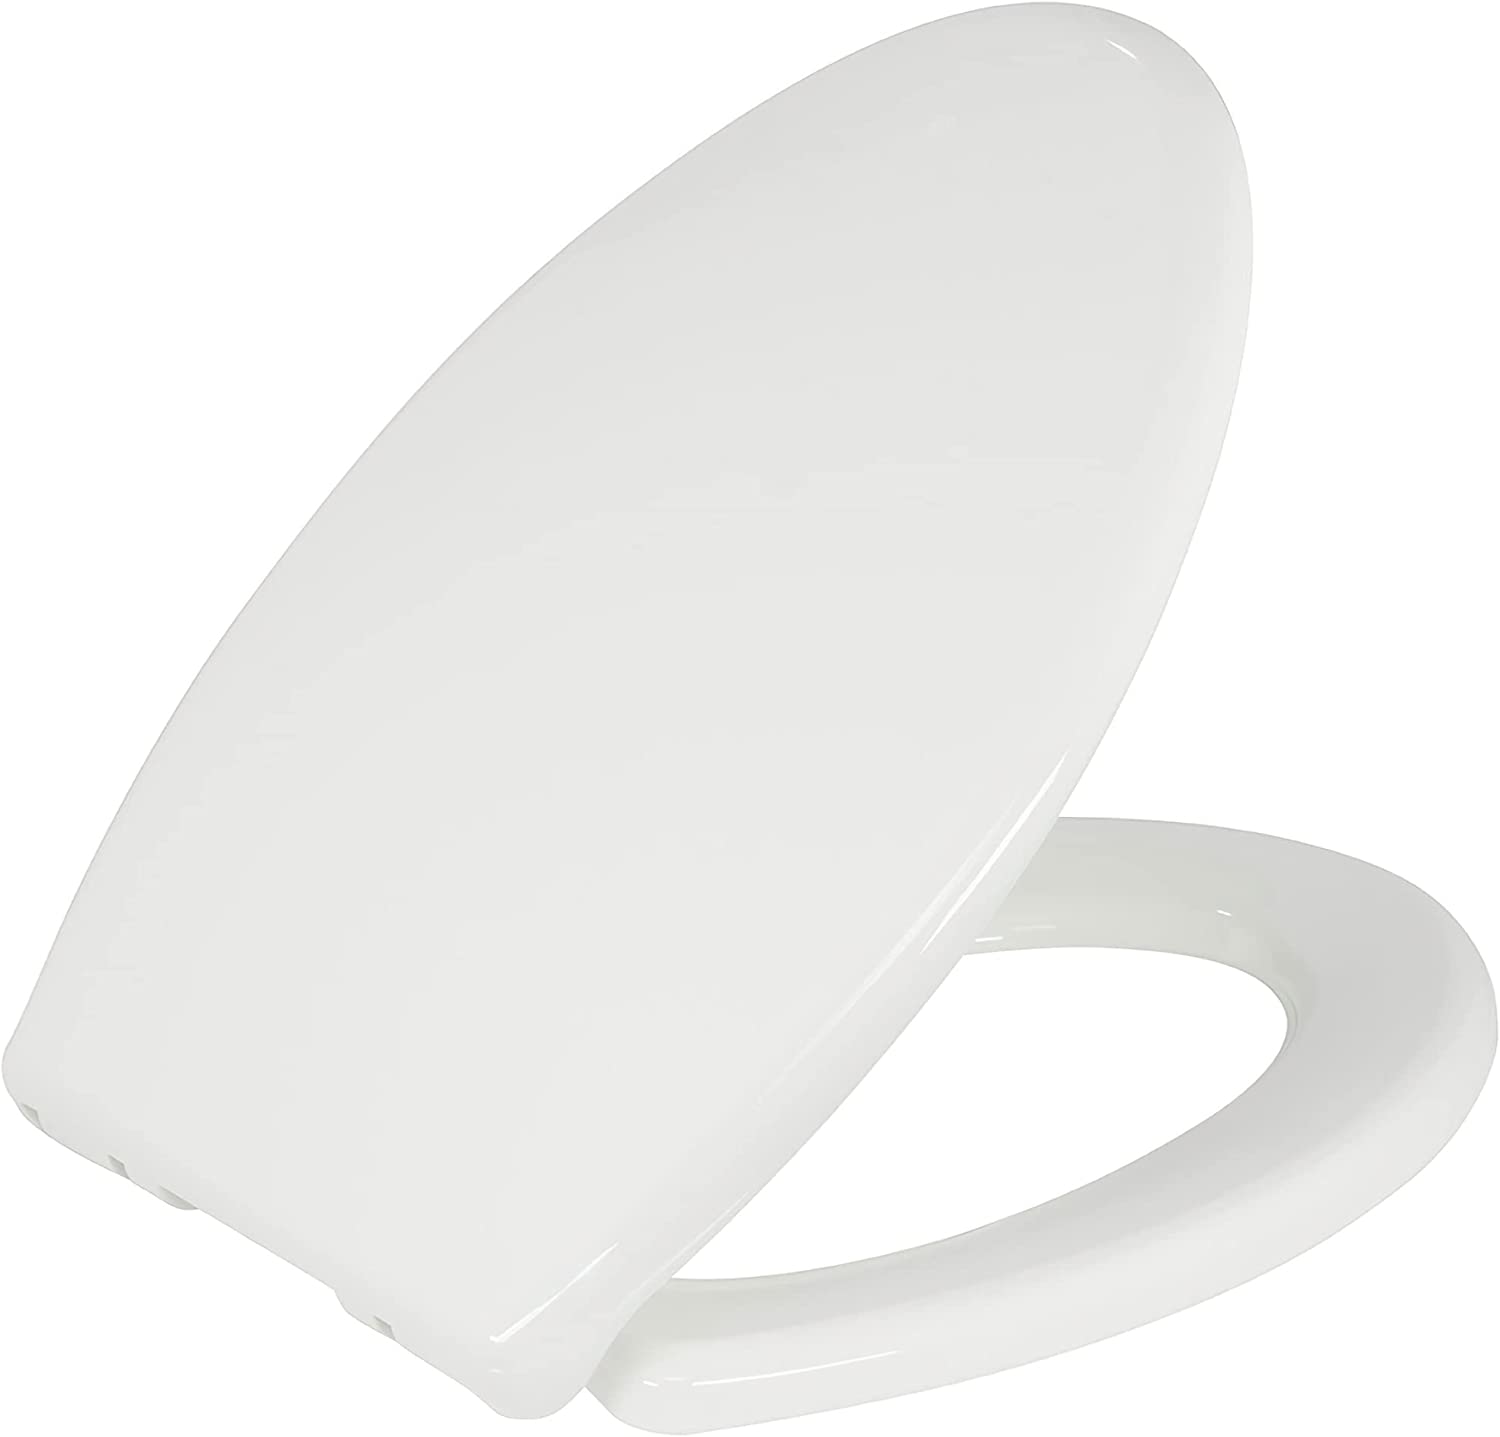 Toilet Seat (Round or Elongated), Slow Close (Soft [...]